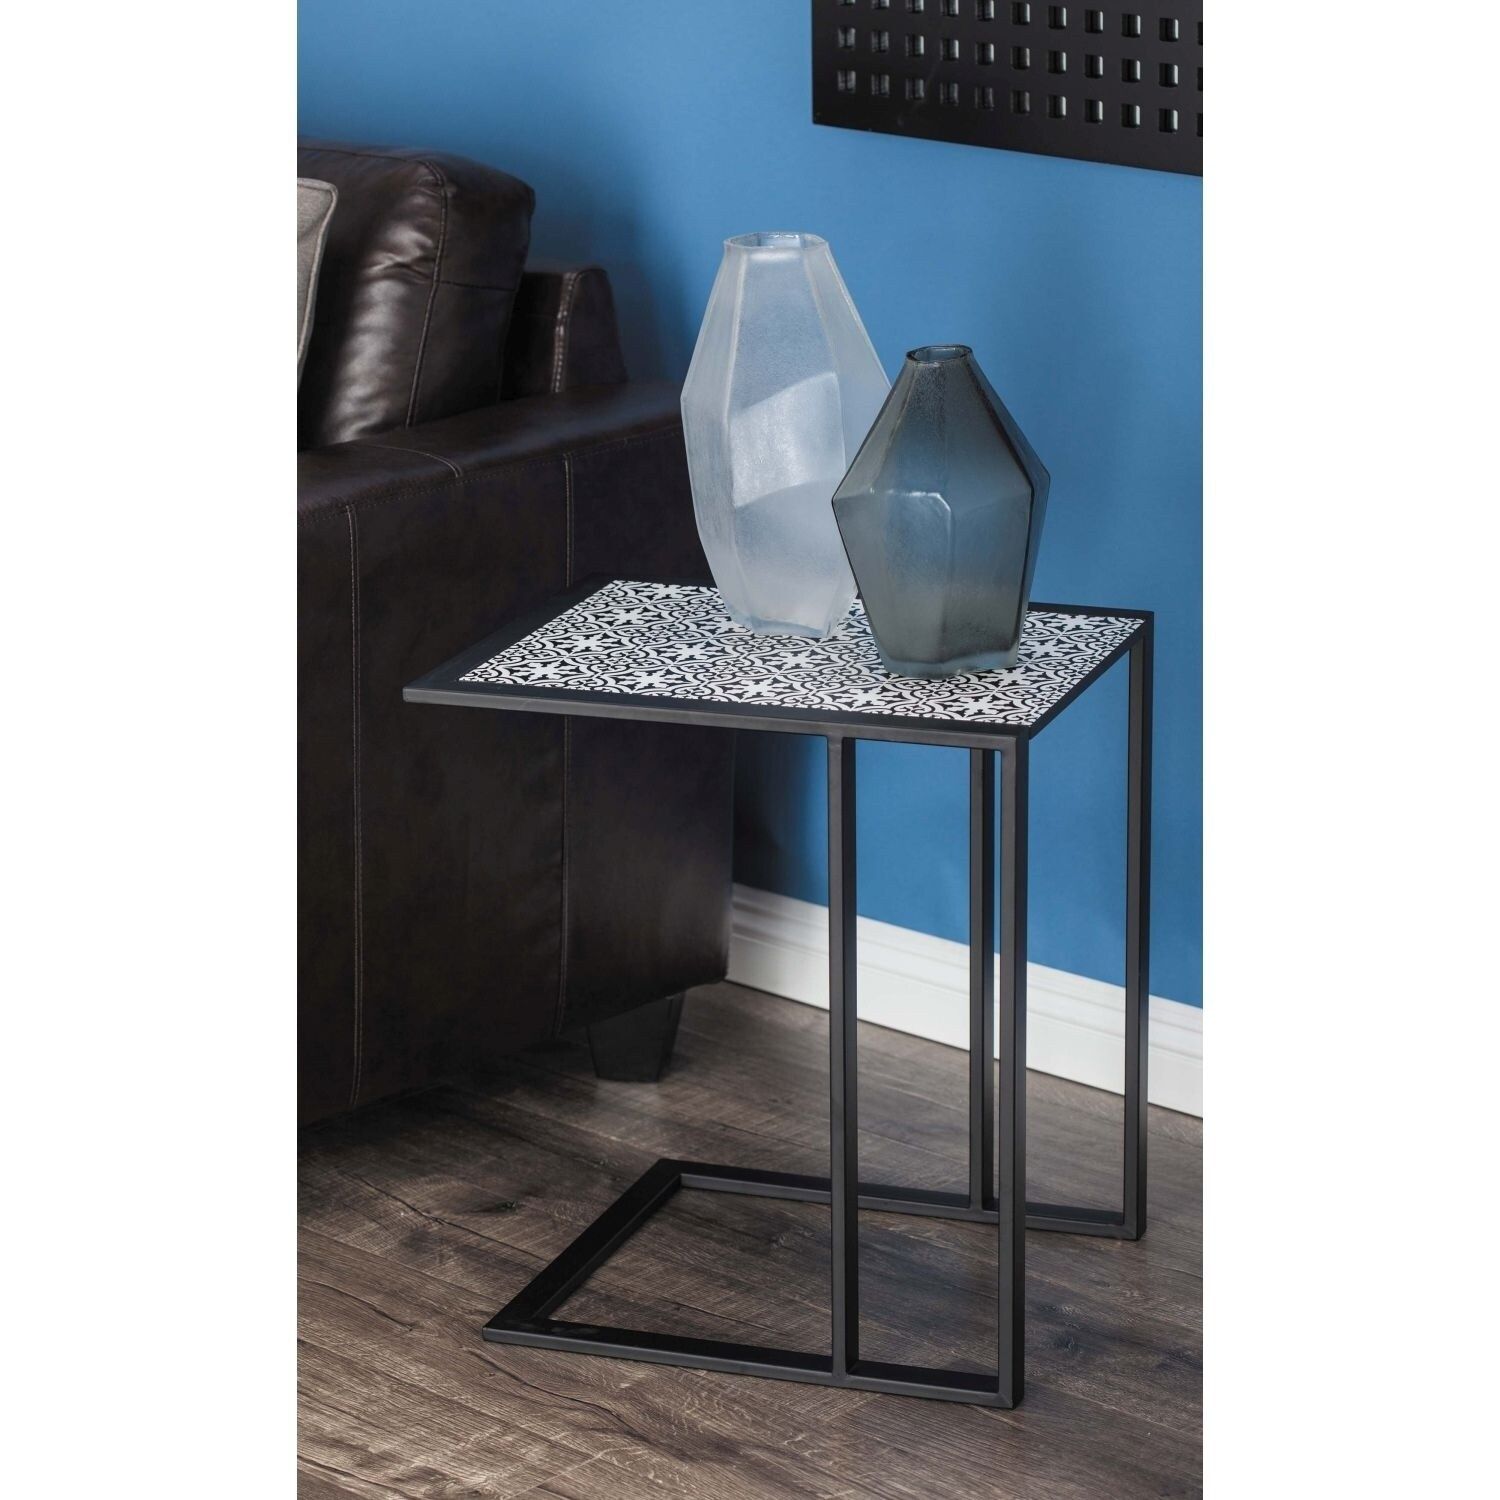 Studio 350 Metal Wood Side Table 19 Inches Wide, 21 Inches High – Bed Bath  & Beyond – 17240728 Intended For Studio 350 Black Metal Coffee Tables (View 10 of 15)